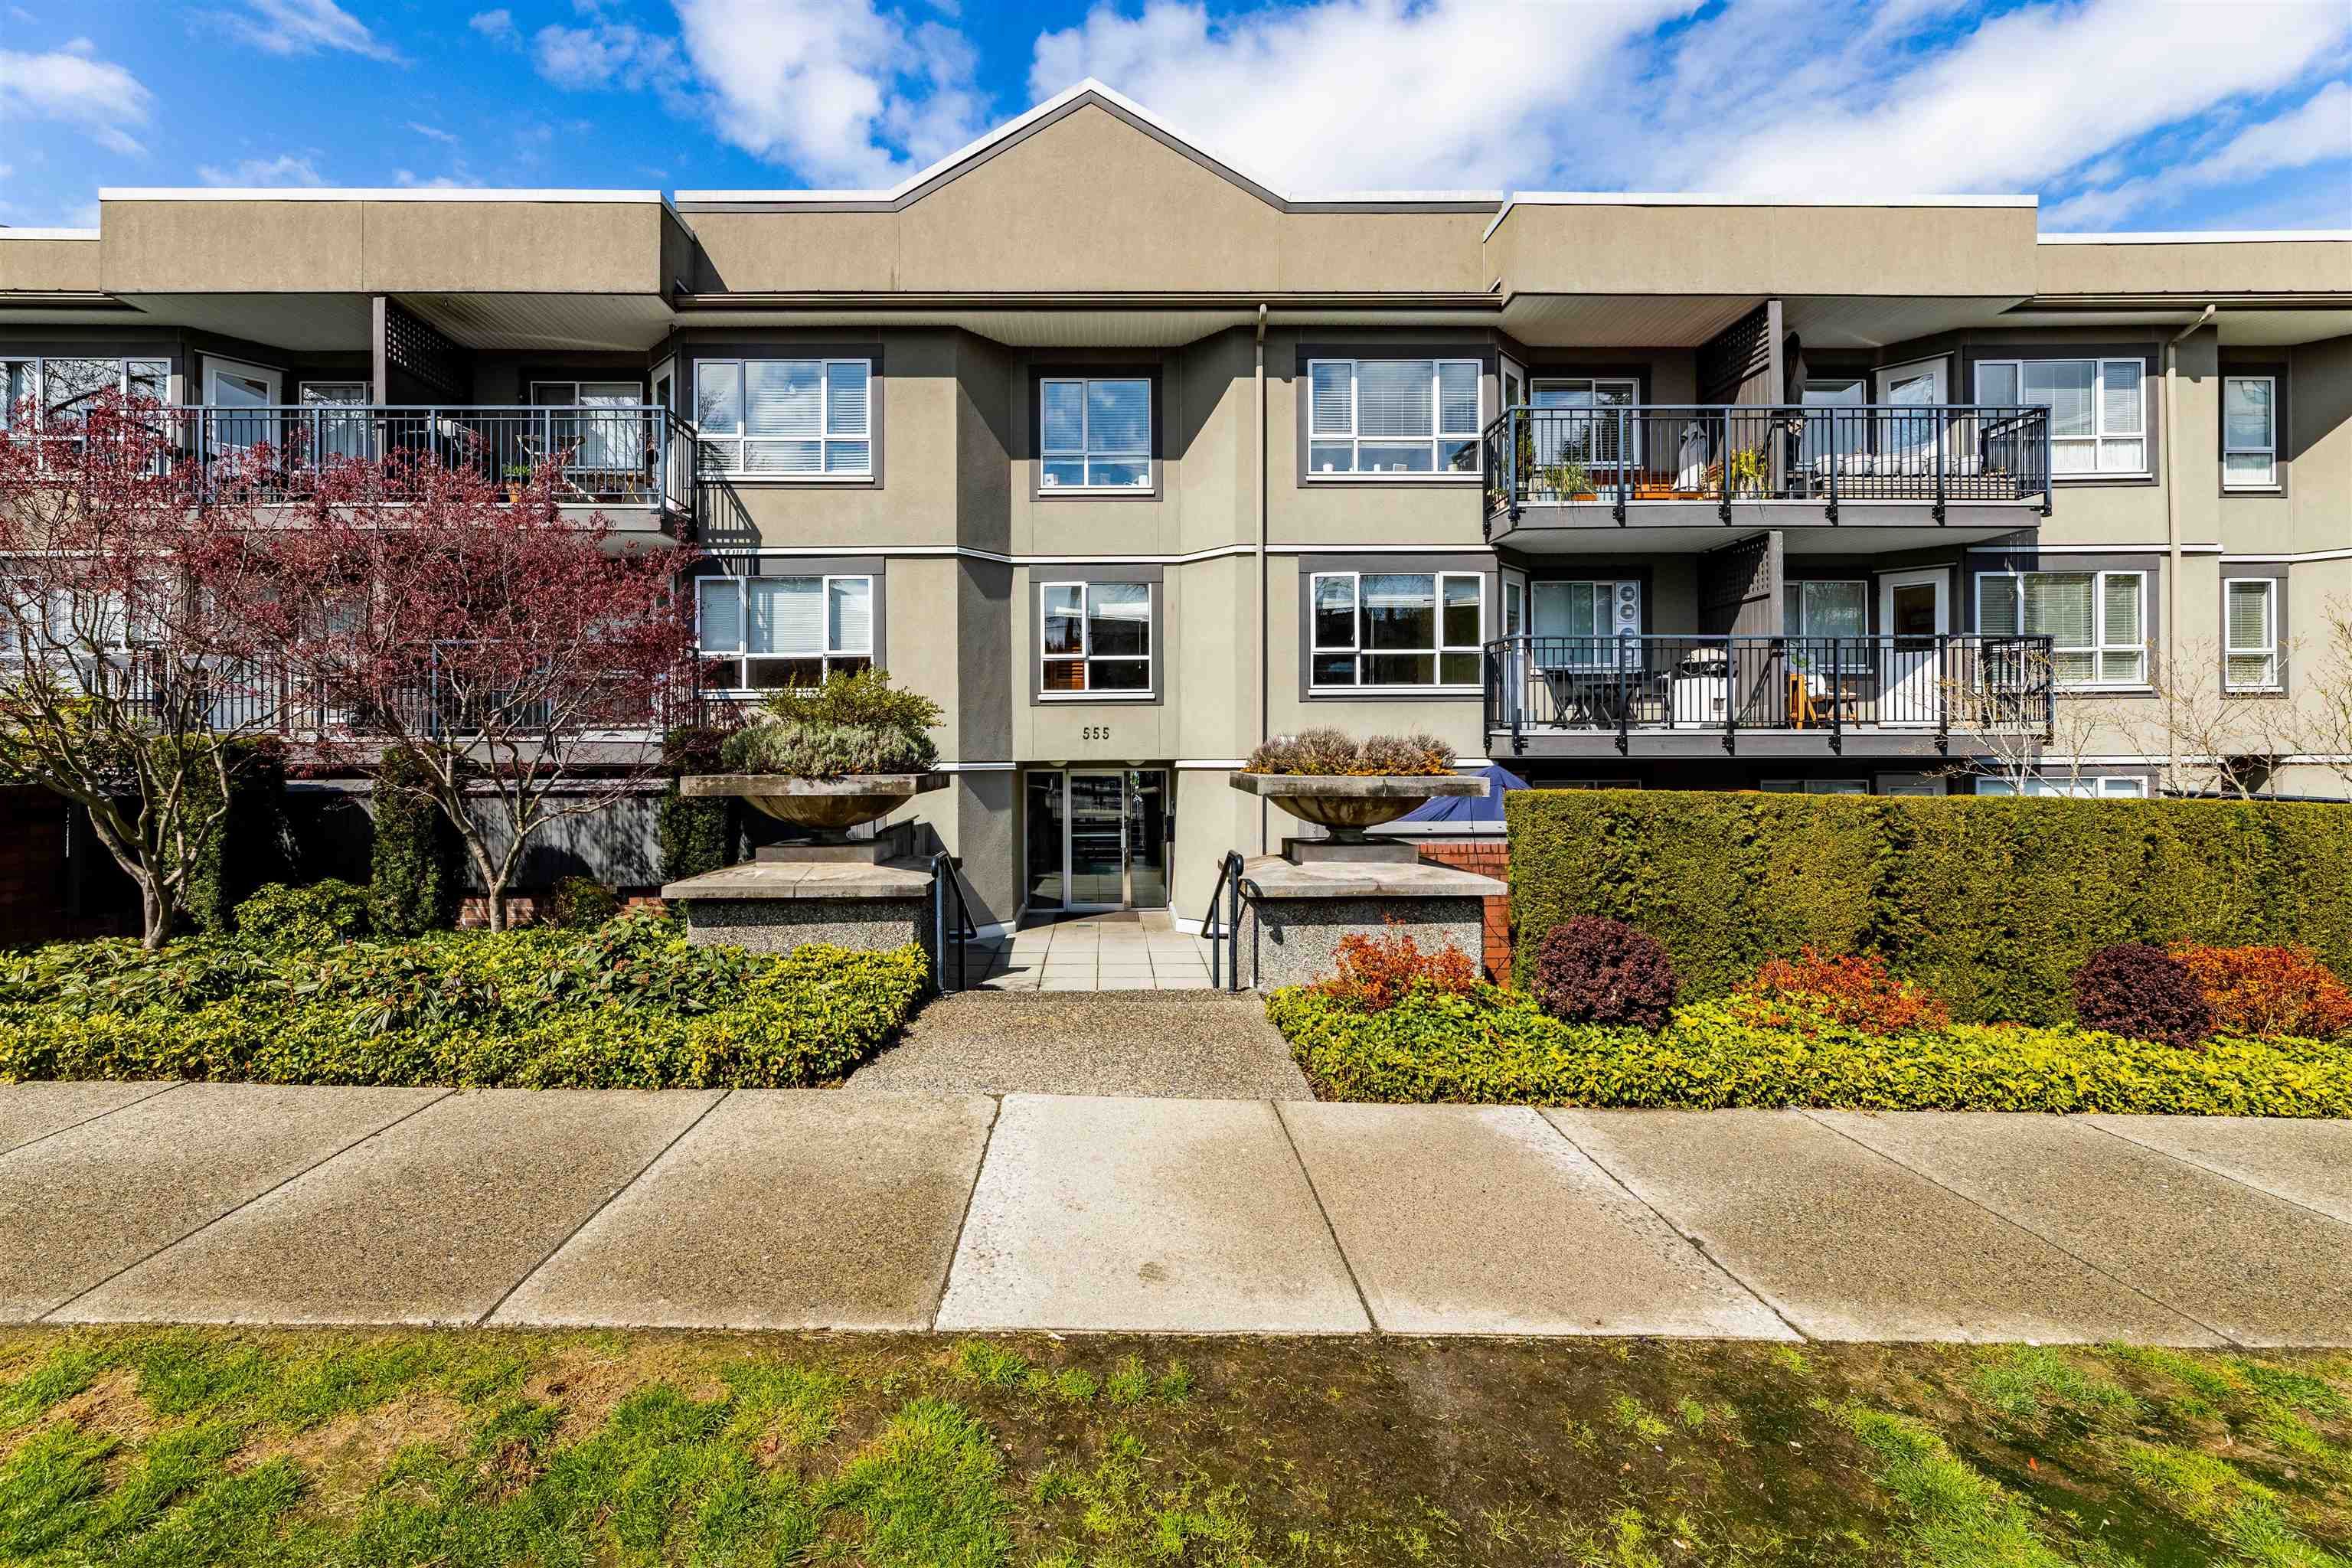 I have sold a property at 115 555 14TH AVE W in Vancouver
